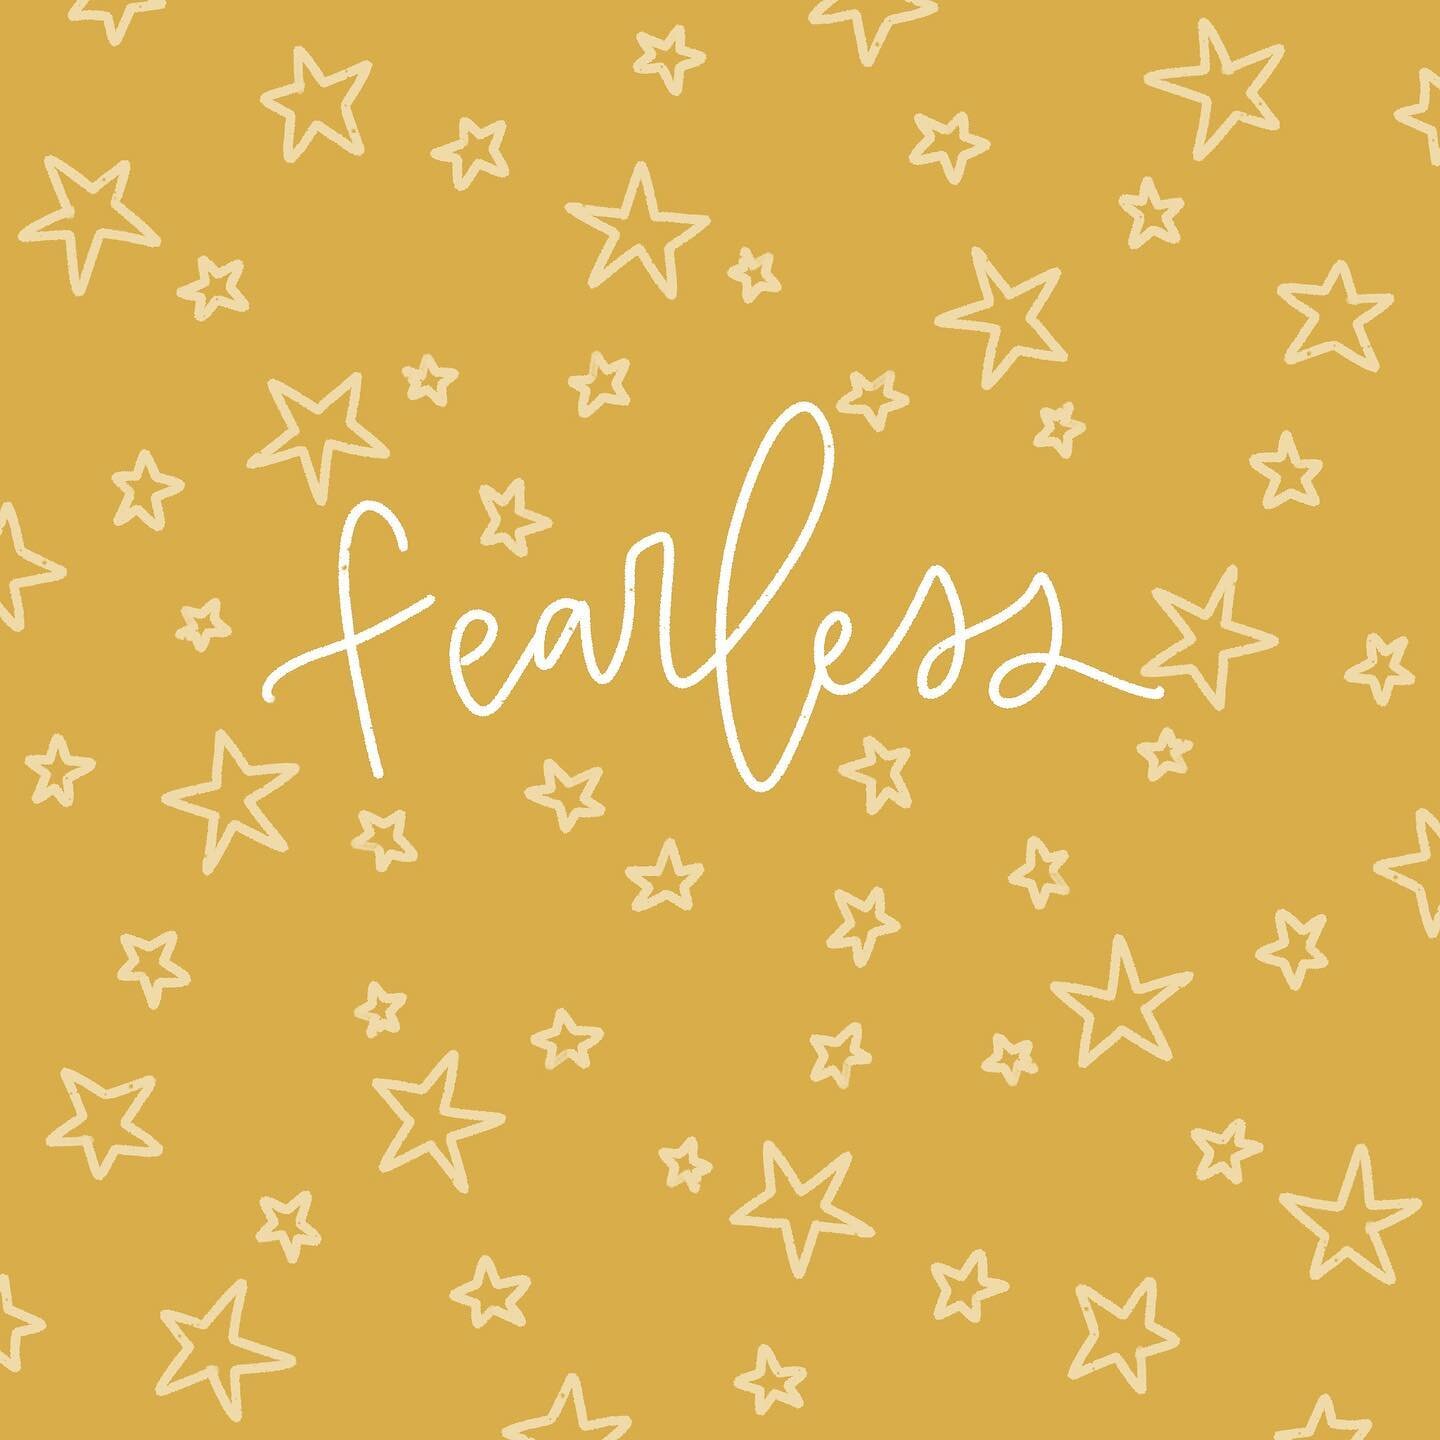 Who else has been listening to the new Fearless all weekend? 10/10 can confirm these songs are just as great for signing at the top of your lungs as they were in 2008. What are your faves?
&bull;
&bull;
&bull;
#fearless #fearlesstaylorsversion #taylo